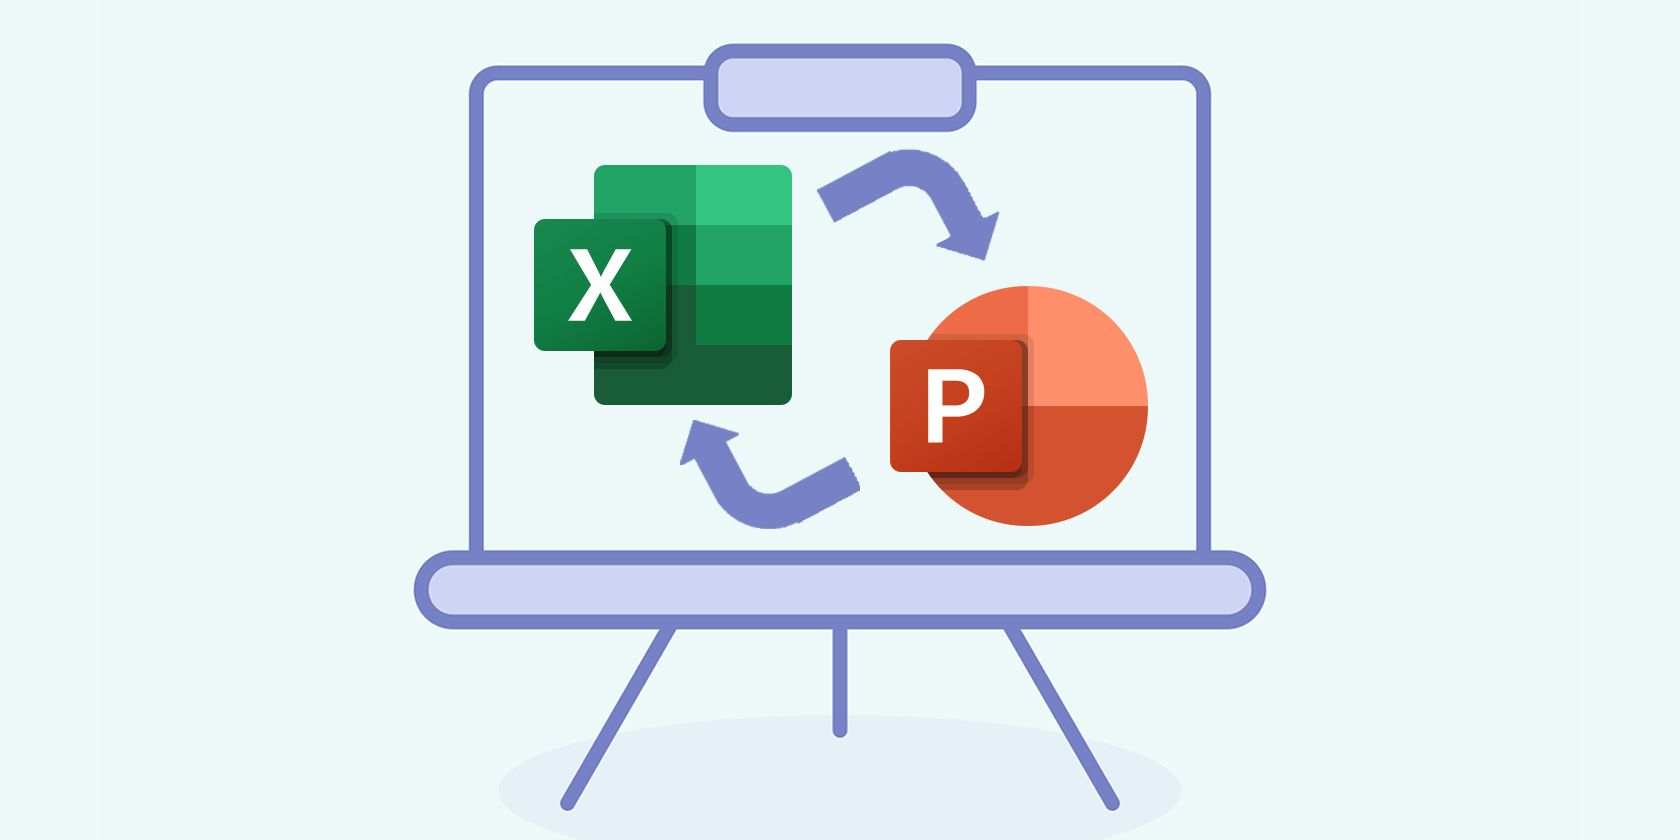 Excel and PowerPoint logos on a drawn easel